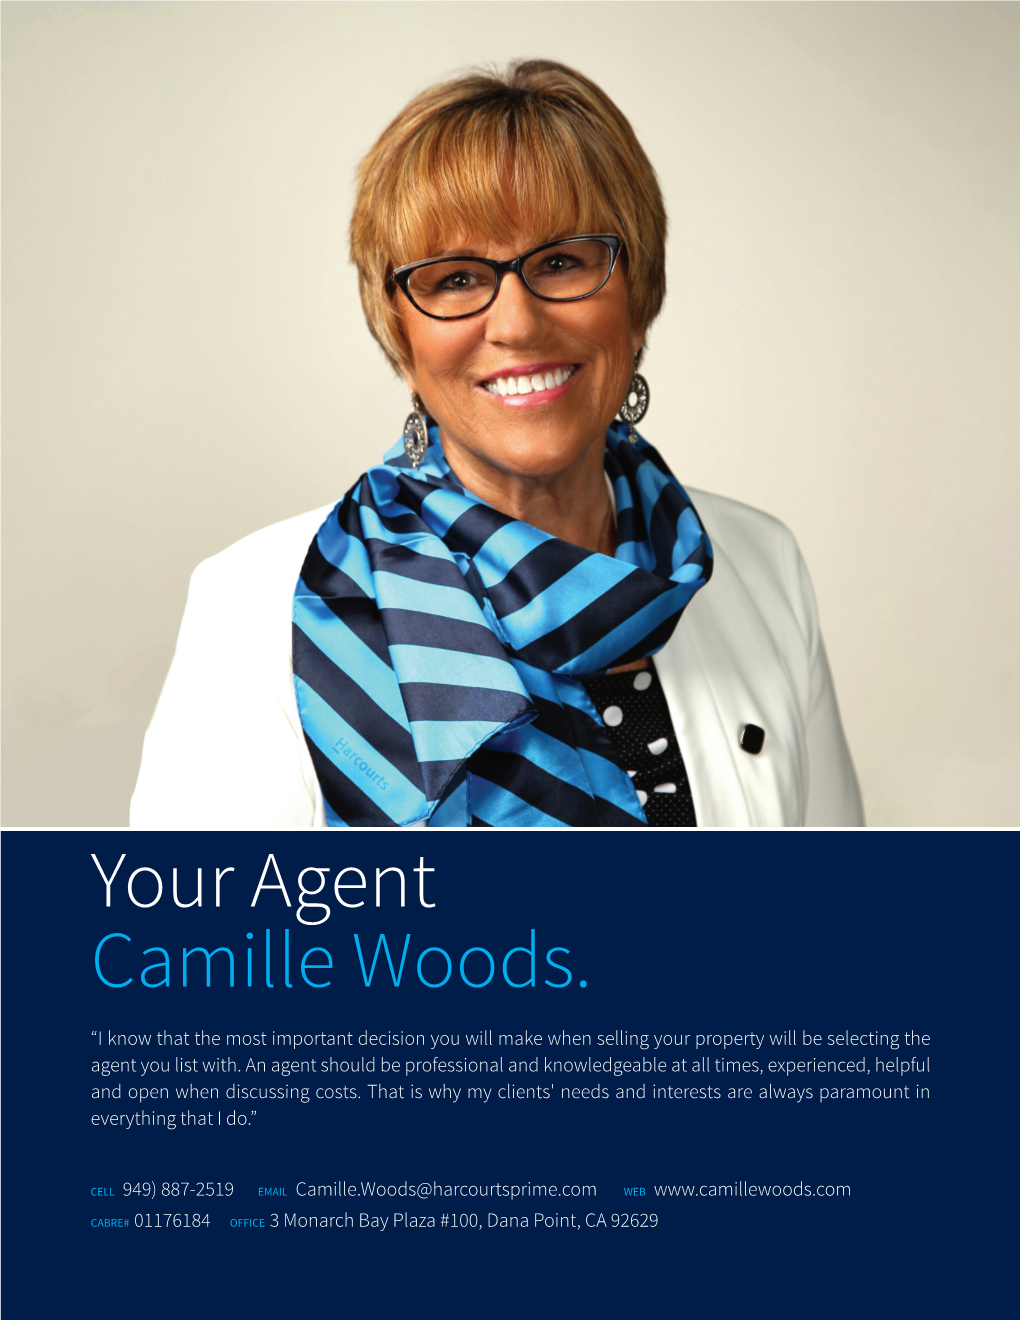 Your Agent Camille Woods